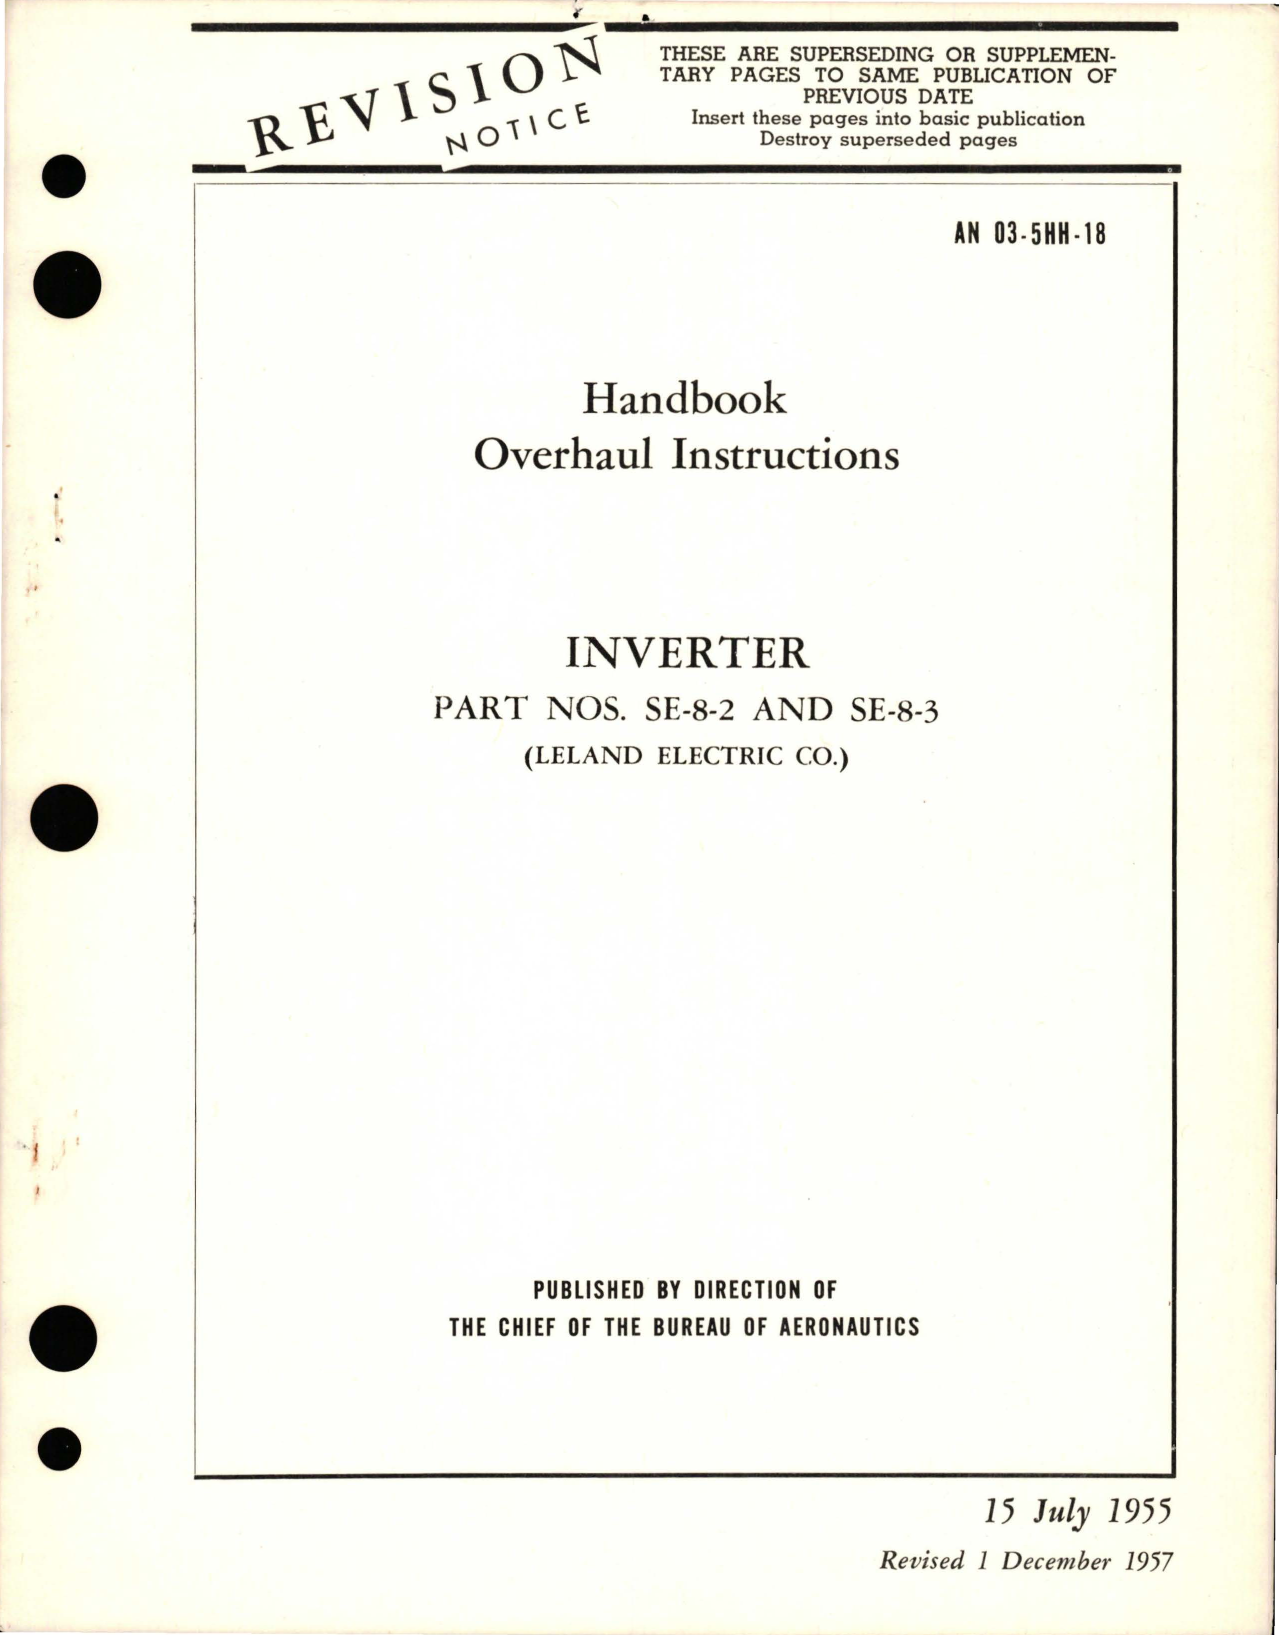 Sample page 1 from AirCorps Library document: Overhaul Instructions for Inverter - Parts SE-8-2 and SE-8-3